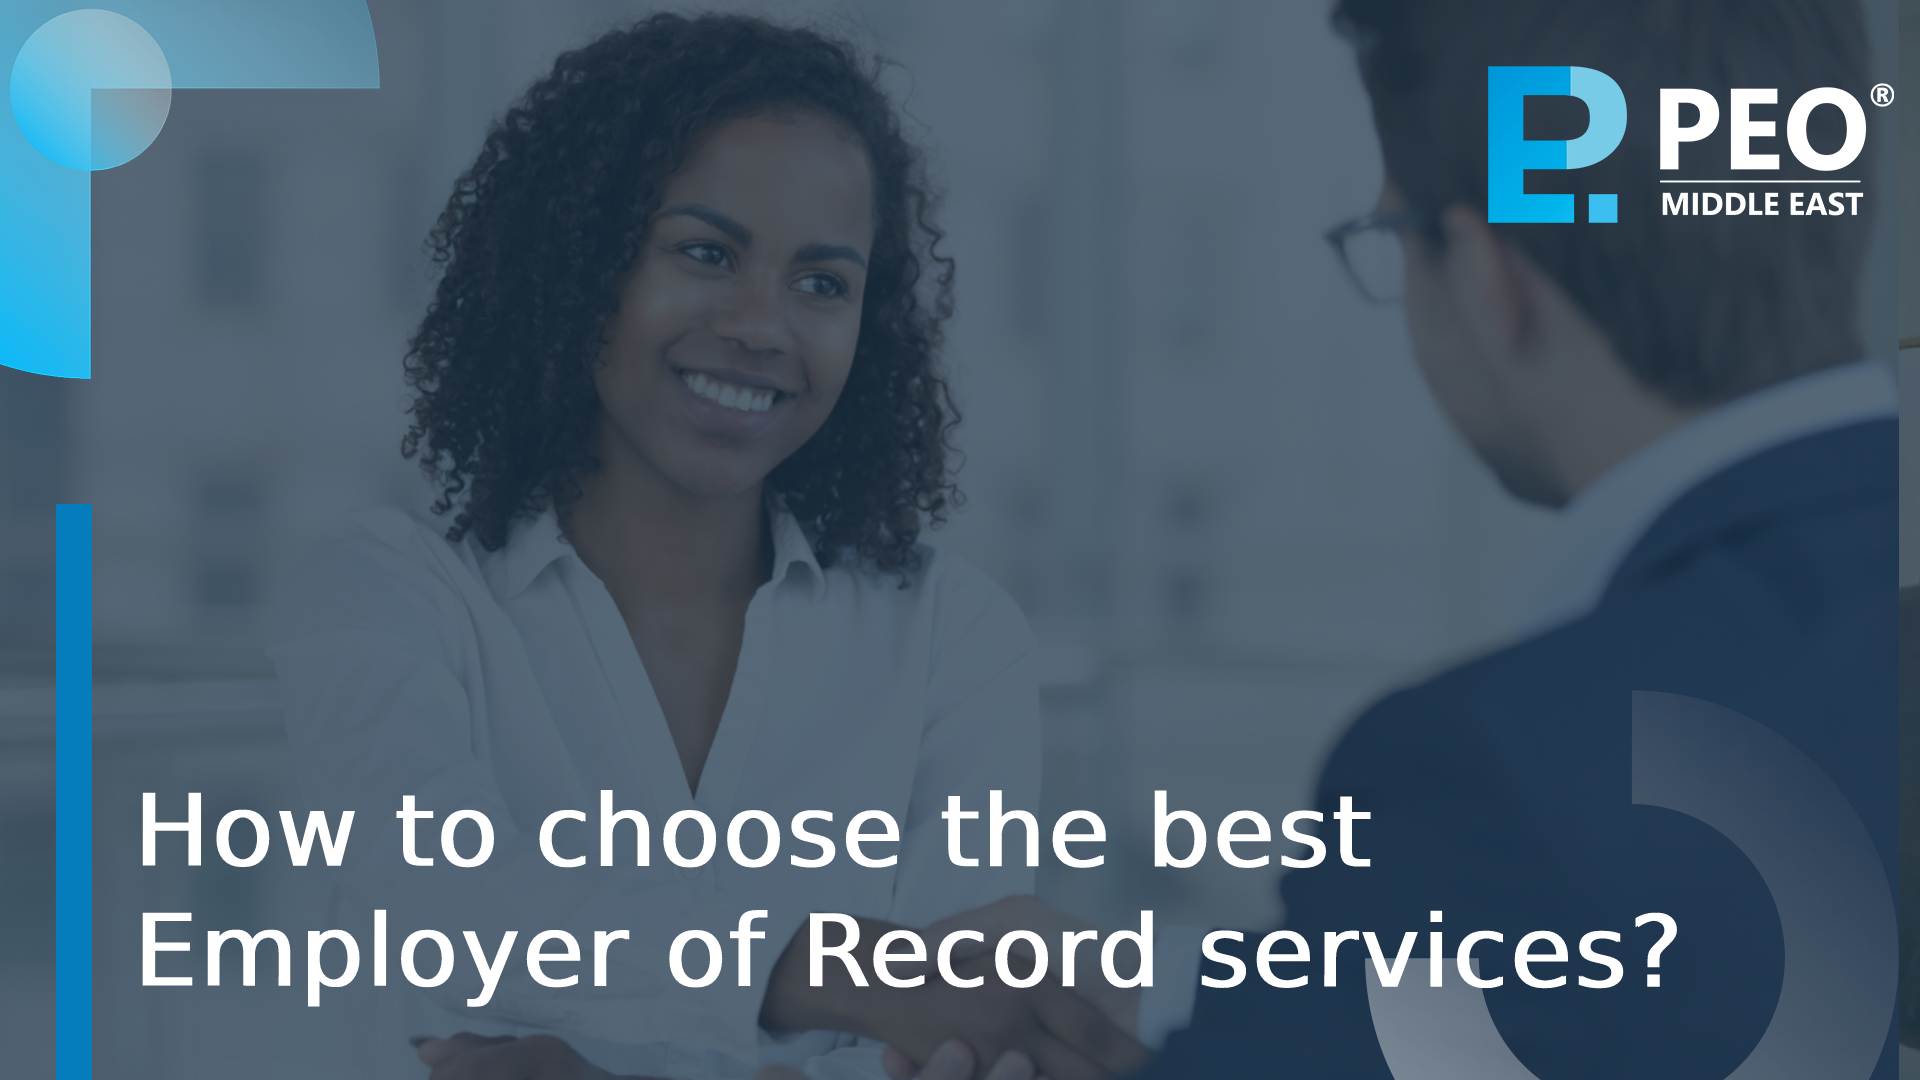 Employer of Record services